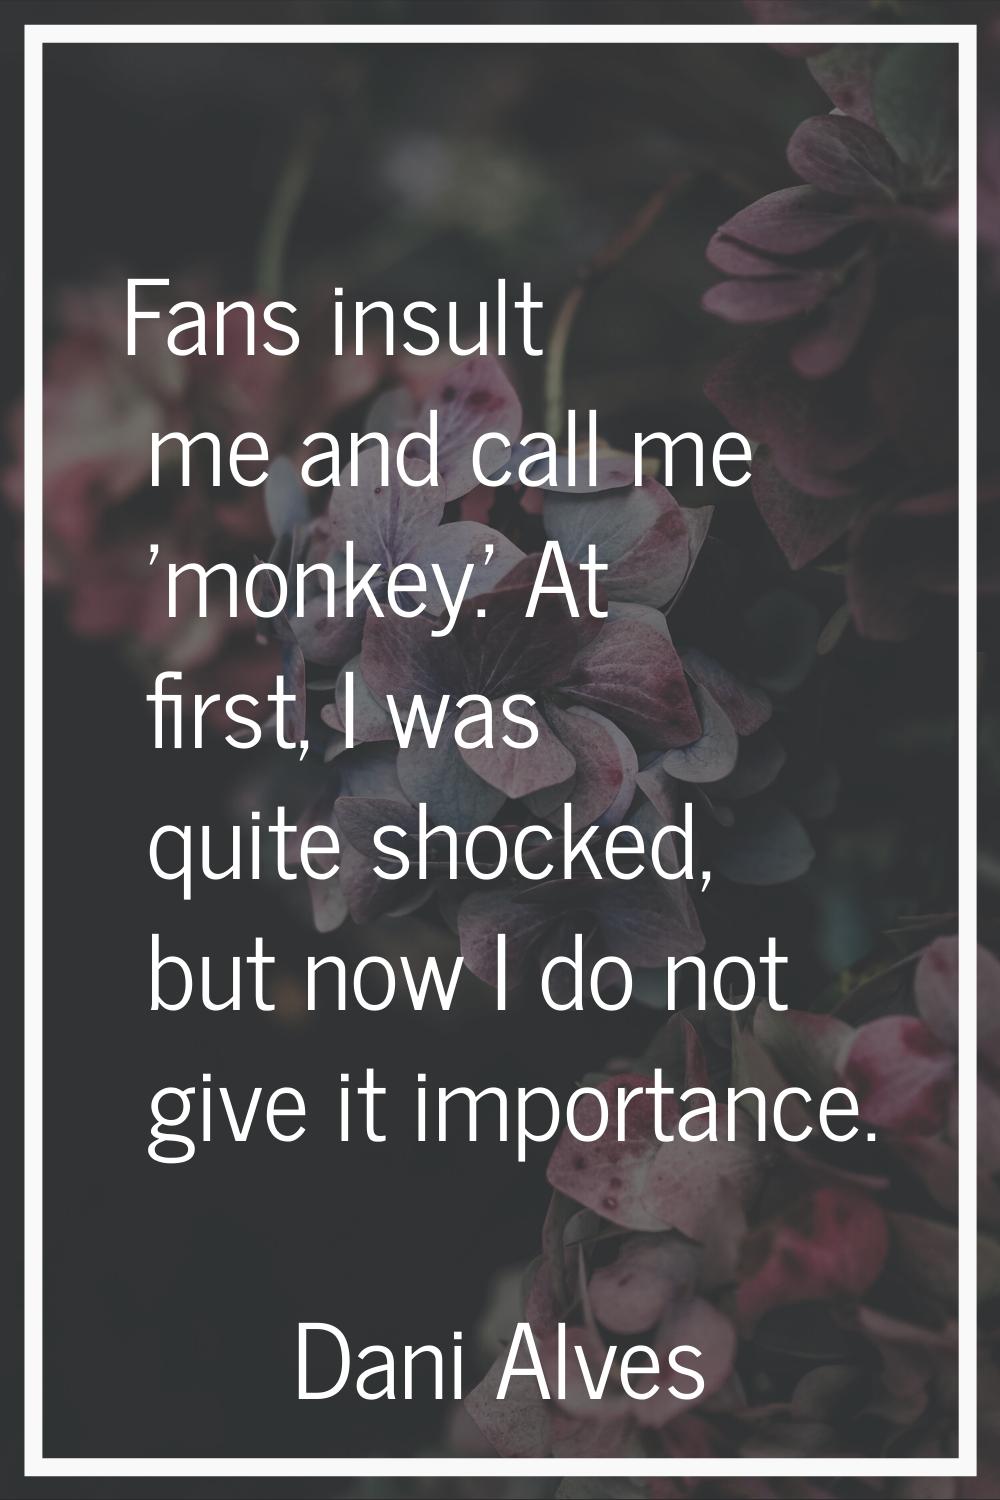 Fans insult me and call me 'monkey.' At first, I was quite shocked, but now I do not give it import